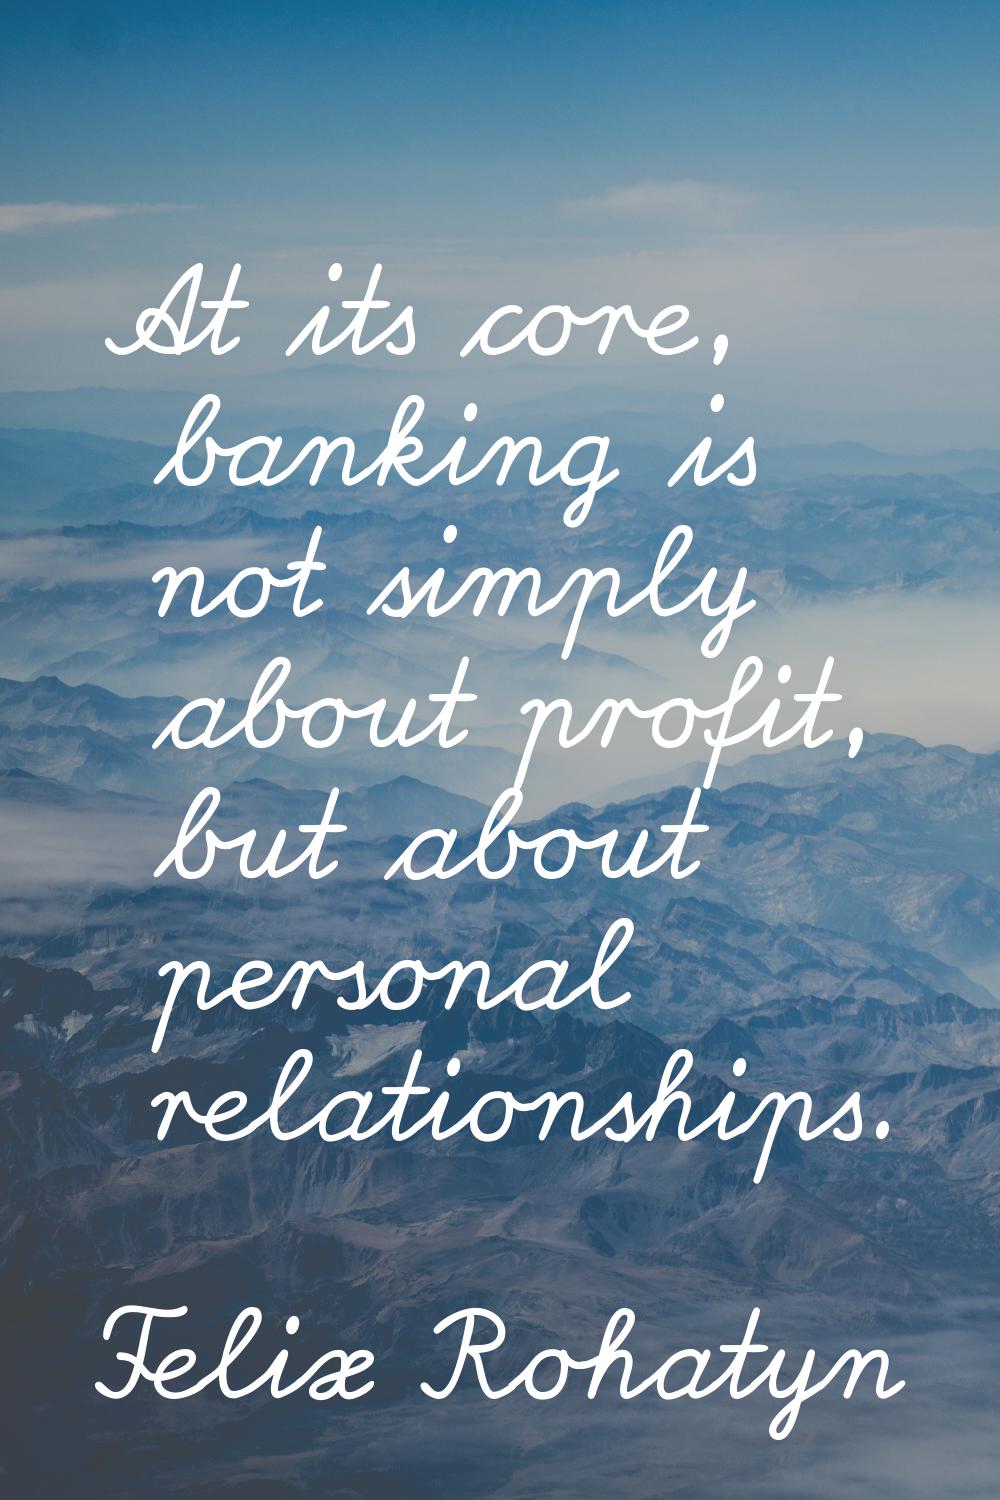 At its core, banking is not simply about profit, but about personal relationships.